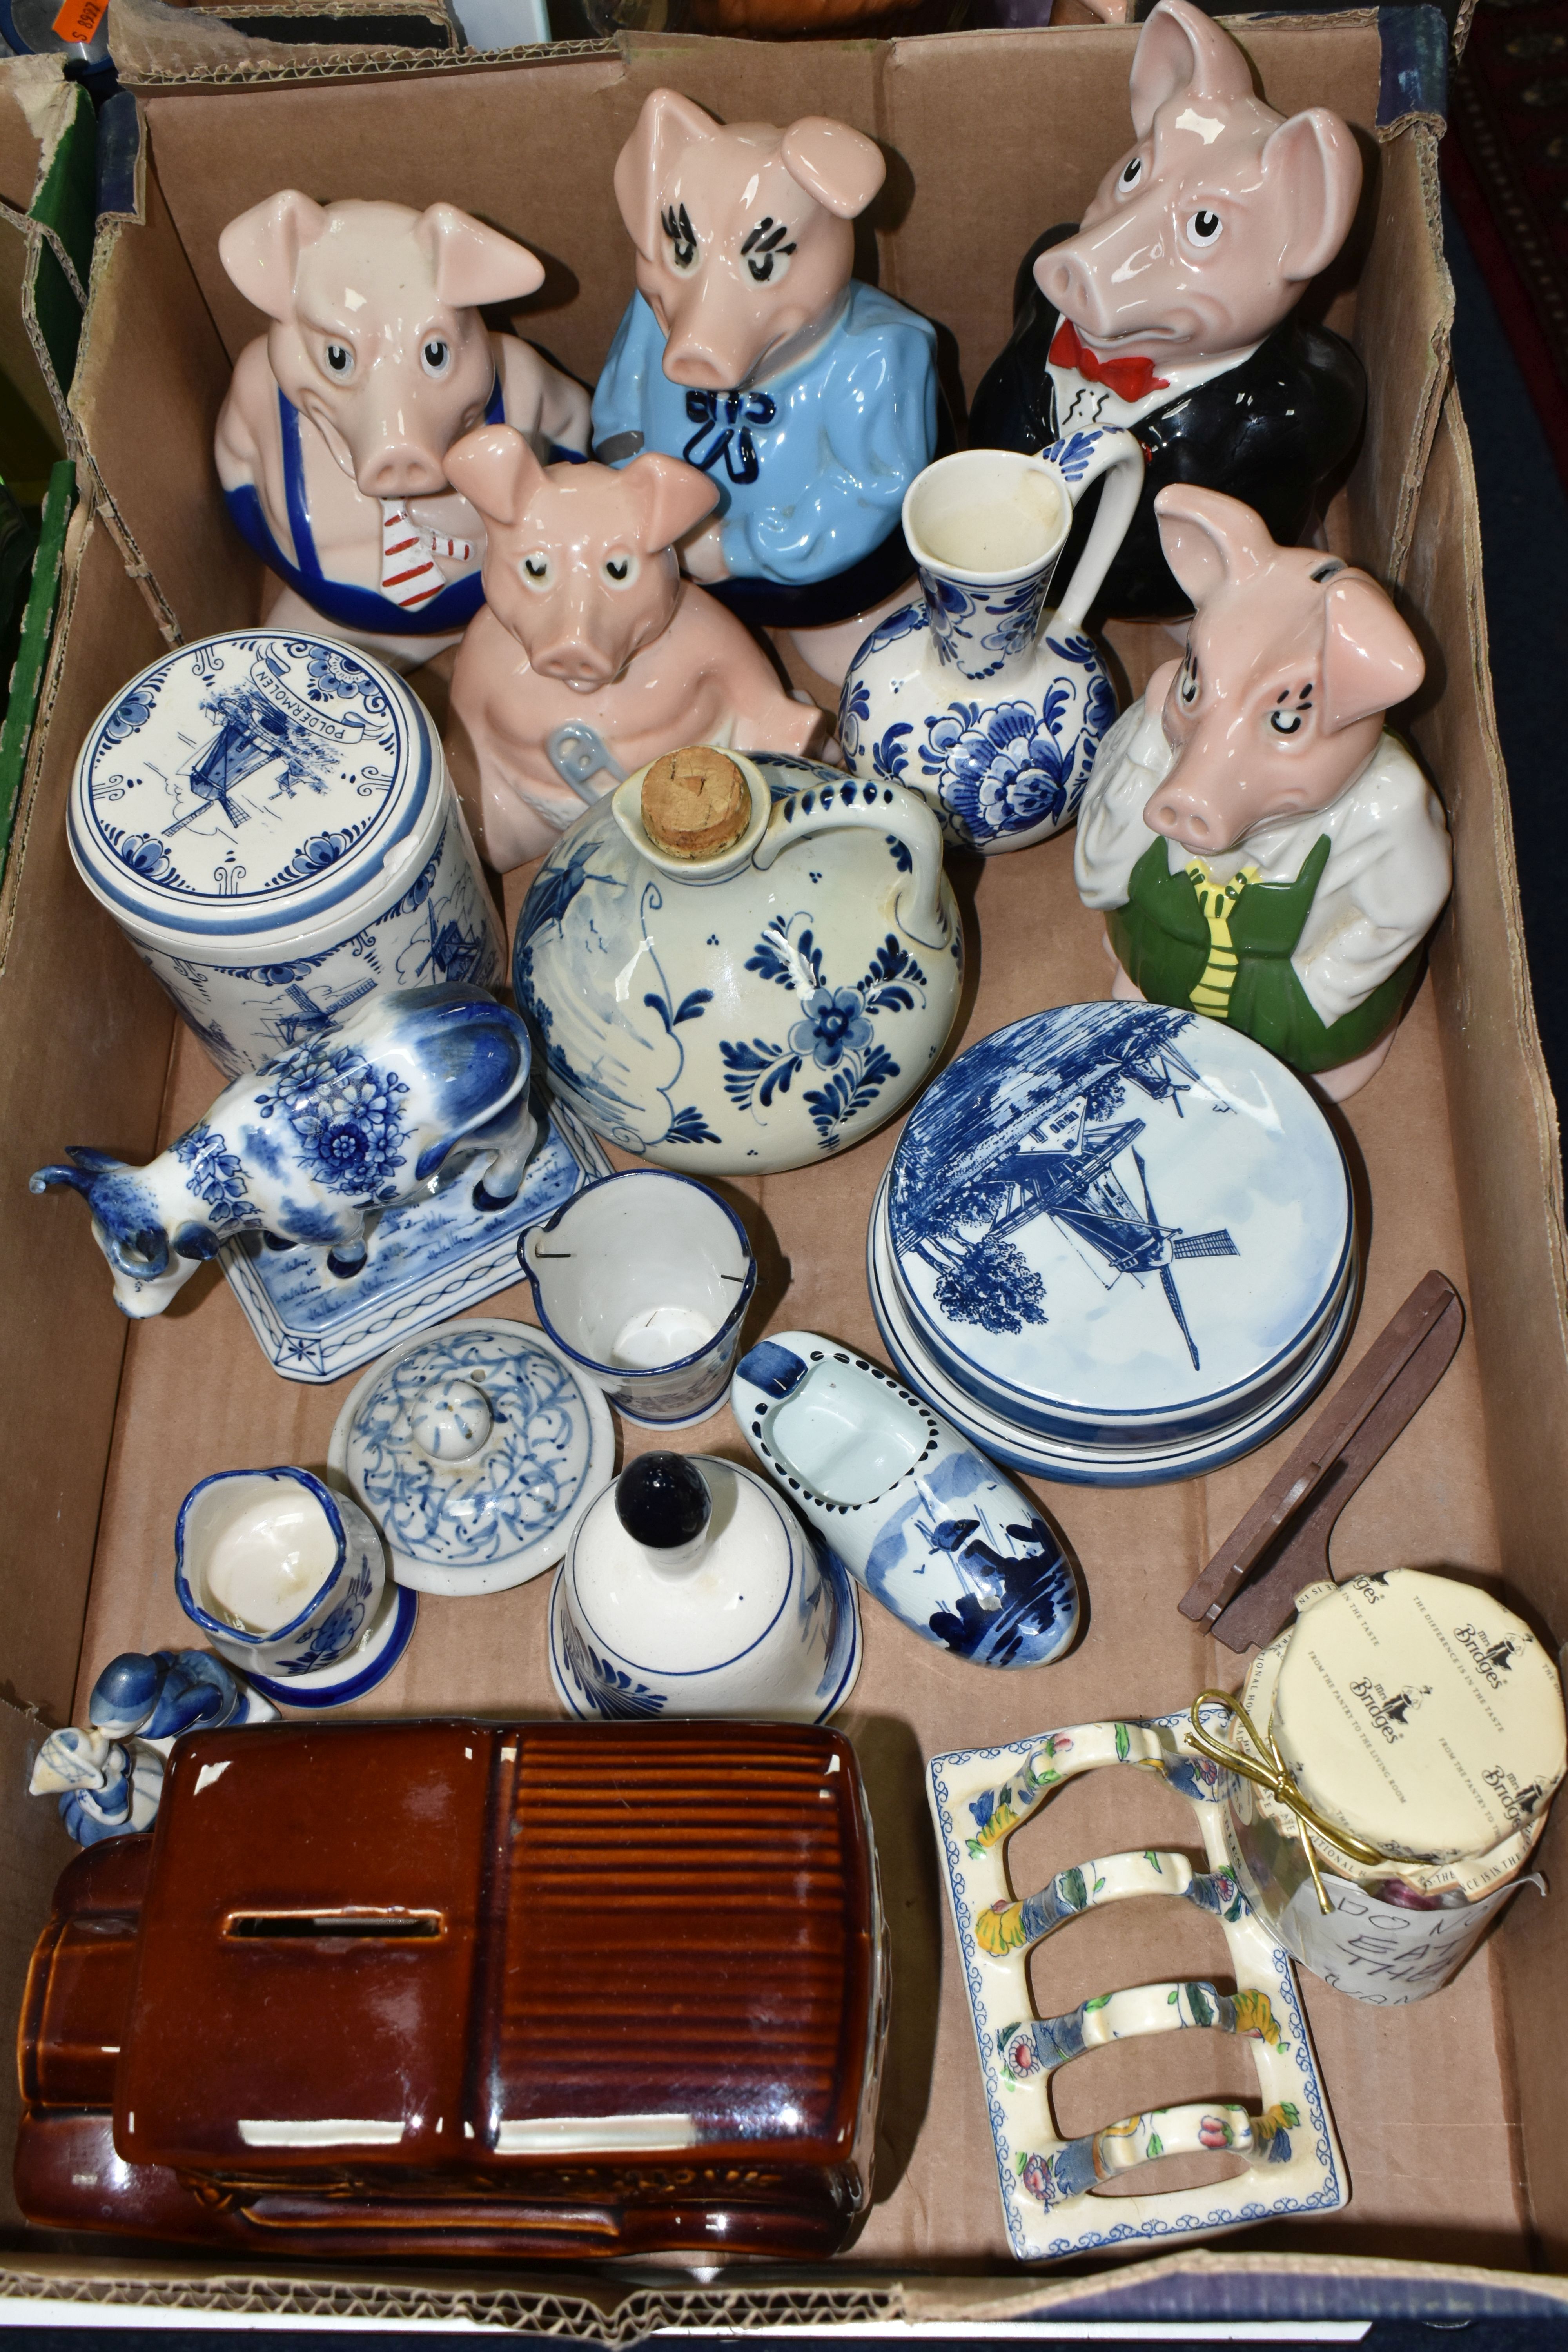 TWO BOXES OF TETLEY TEA NOVELTY CERAMICS, WADE NATWEST PIGGY BANKS, ASSORTED DELFT POTTERY - Image 2 of 3